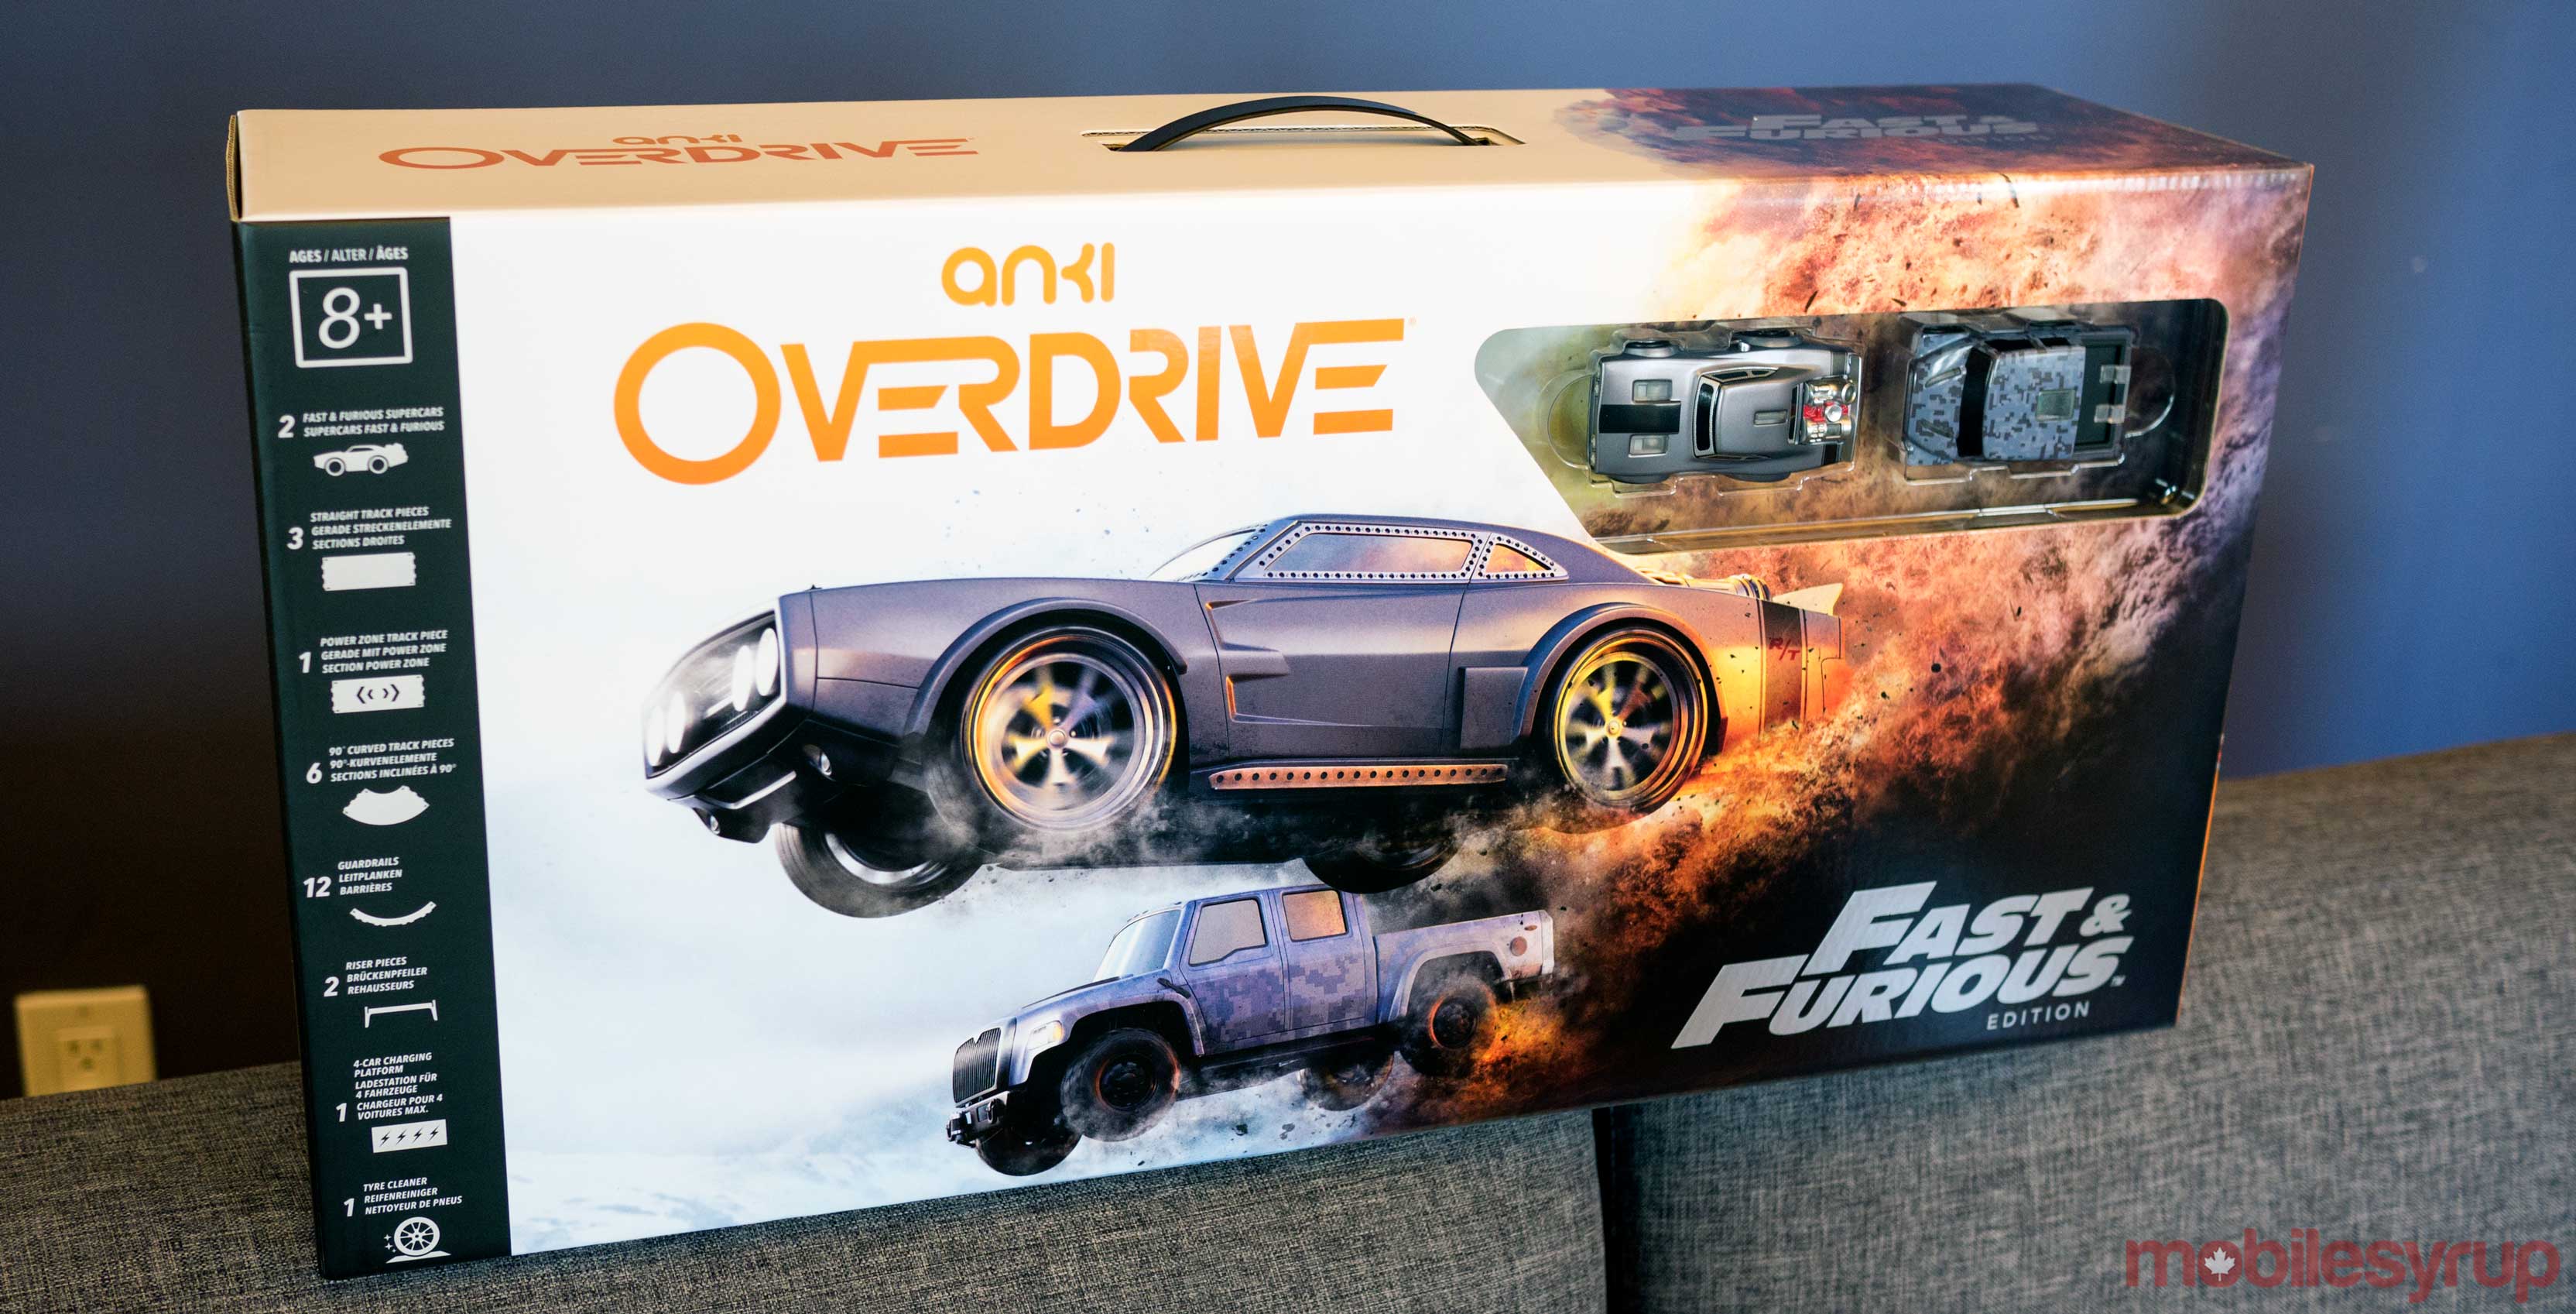 anki overdrive fast and furious